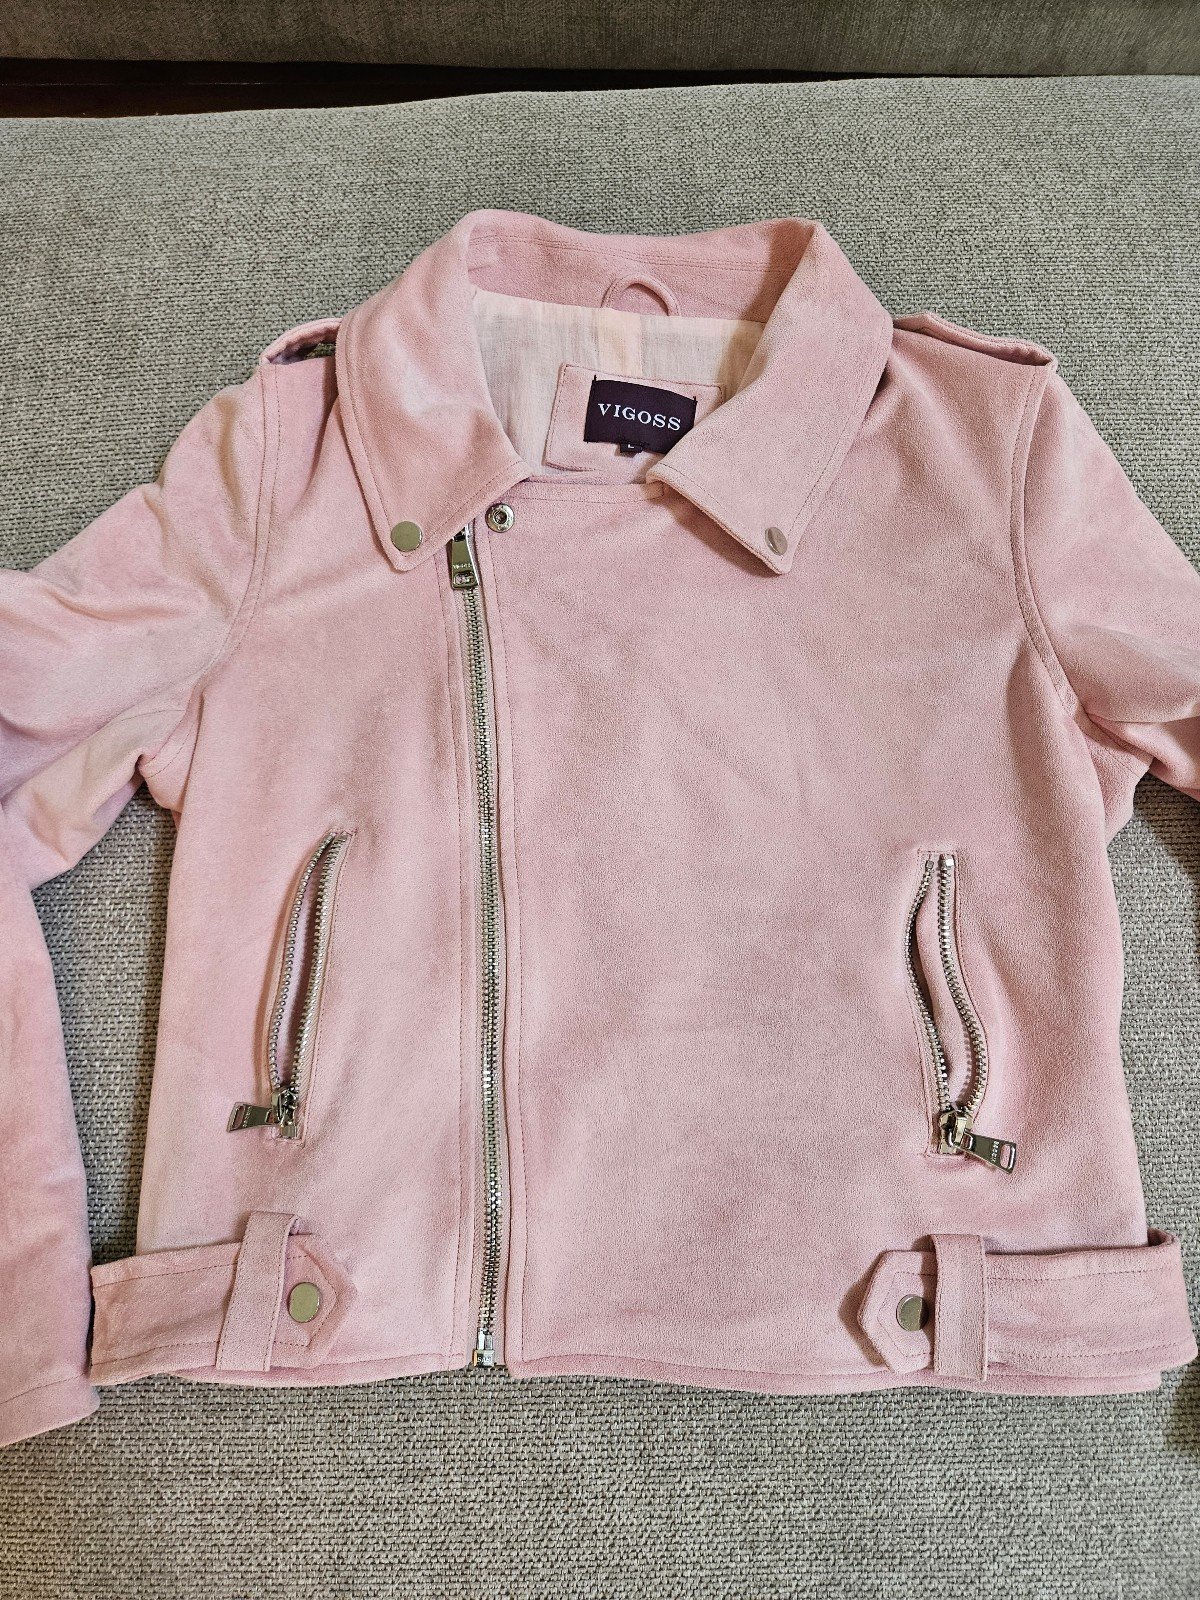 Popular Vigoss Faux Suede Pink Moto Jacket jgModoZly all for you